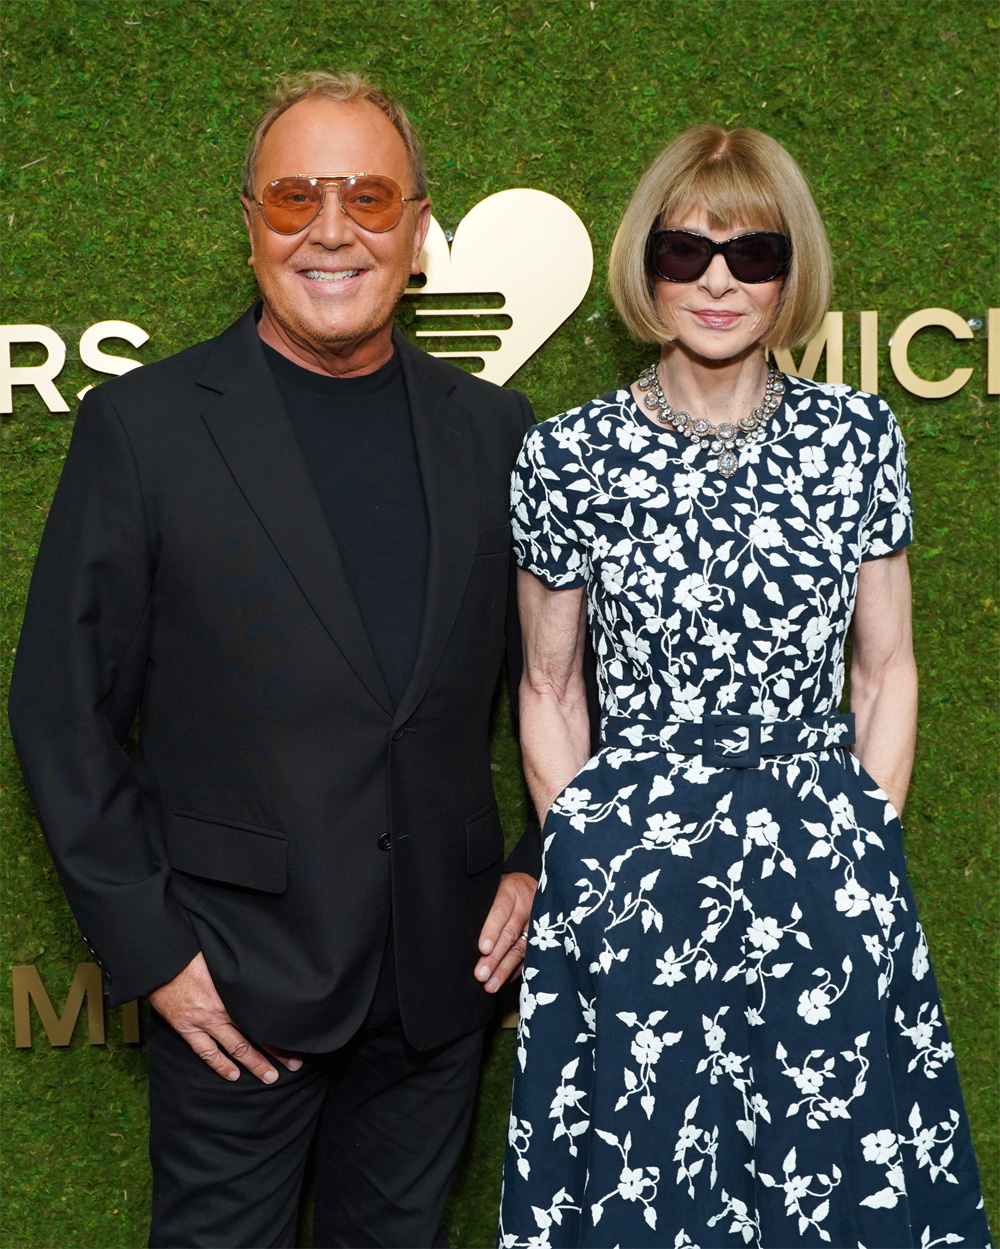 Anna Wintour with Kors at the Heart Awards | About Her